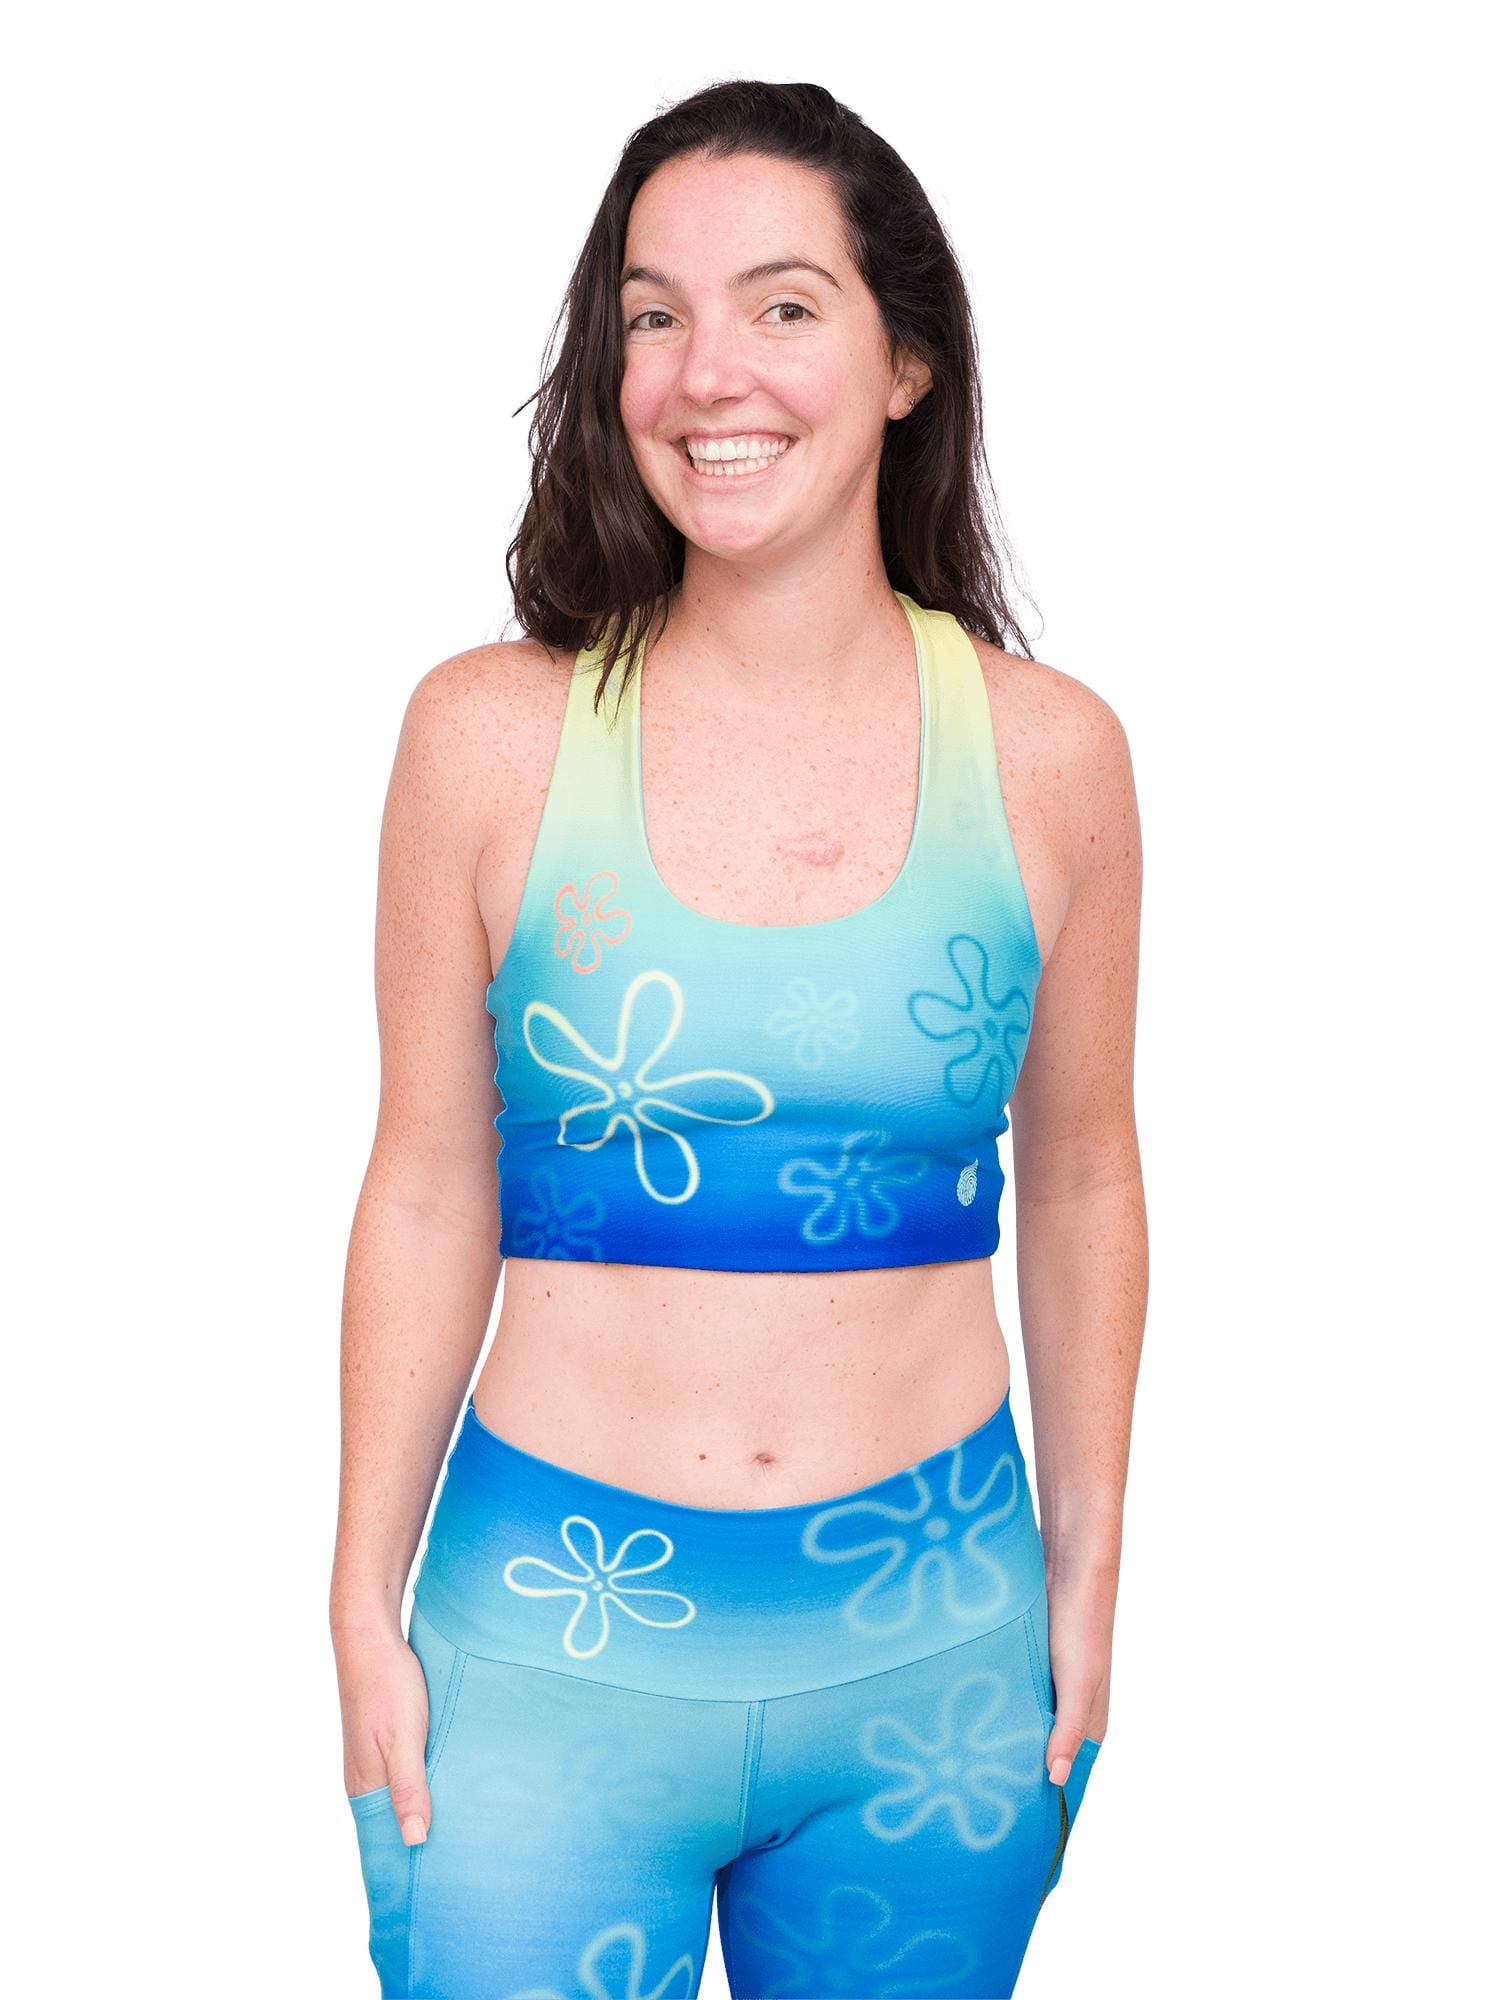 Model: Maddie is the Program & Outreach Director at Debris Free Oceans and a restoration ecology educator. She is 5’8”, 135lbs, and wearing a size M legging and top.